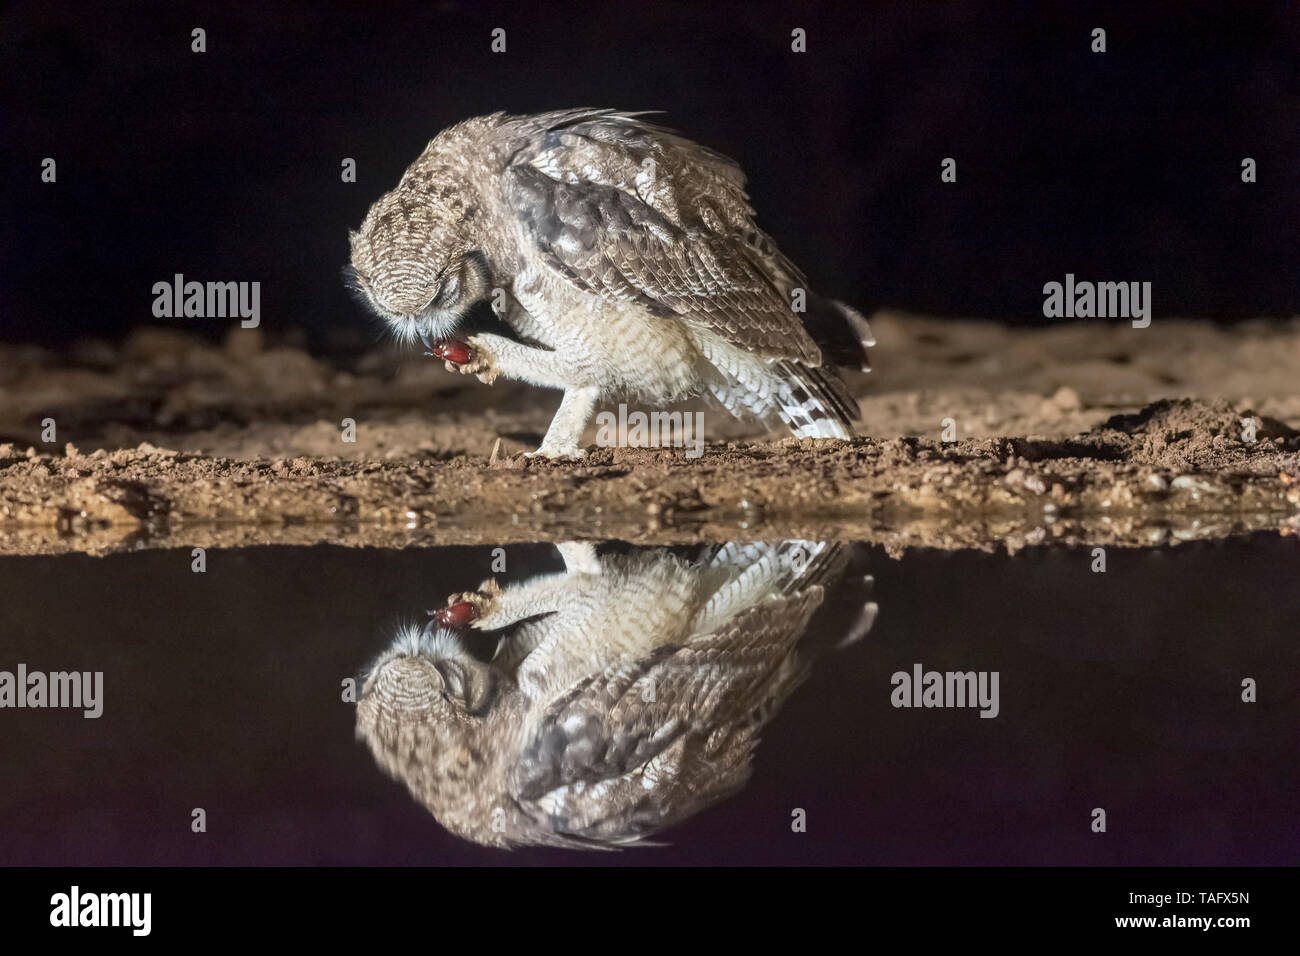 Spotted Eagle Owl (Bubo africanus) eating an insect at the water's edge at night, KwaZulu-Natal, South Africa Stock Photo